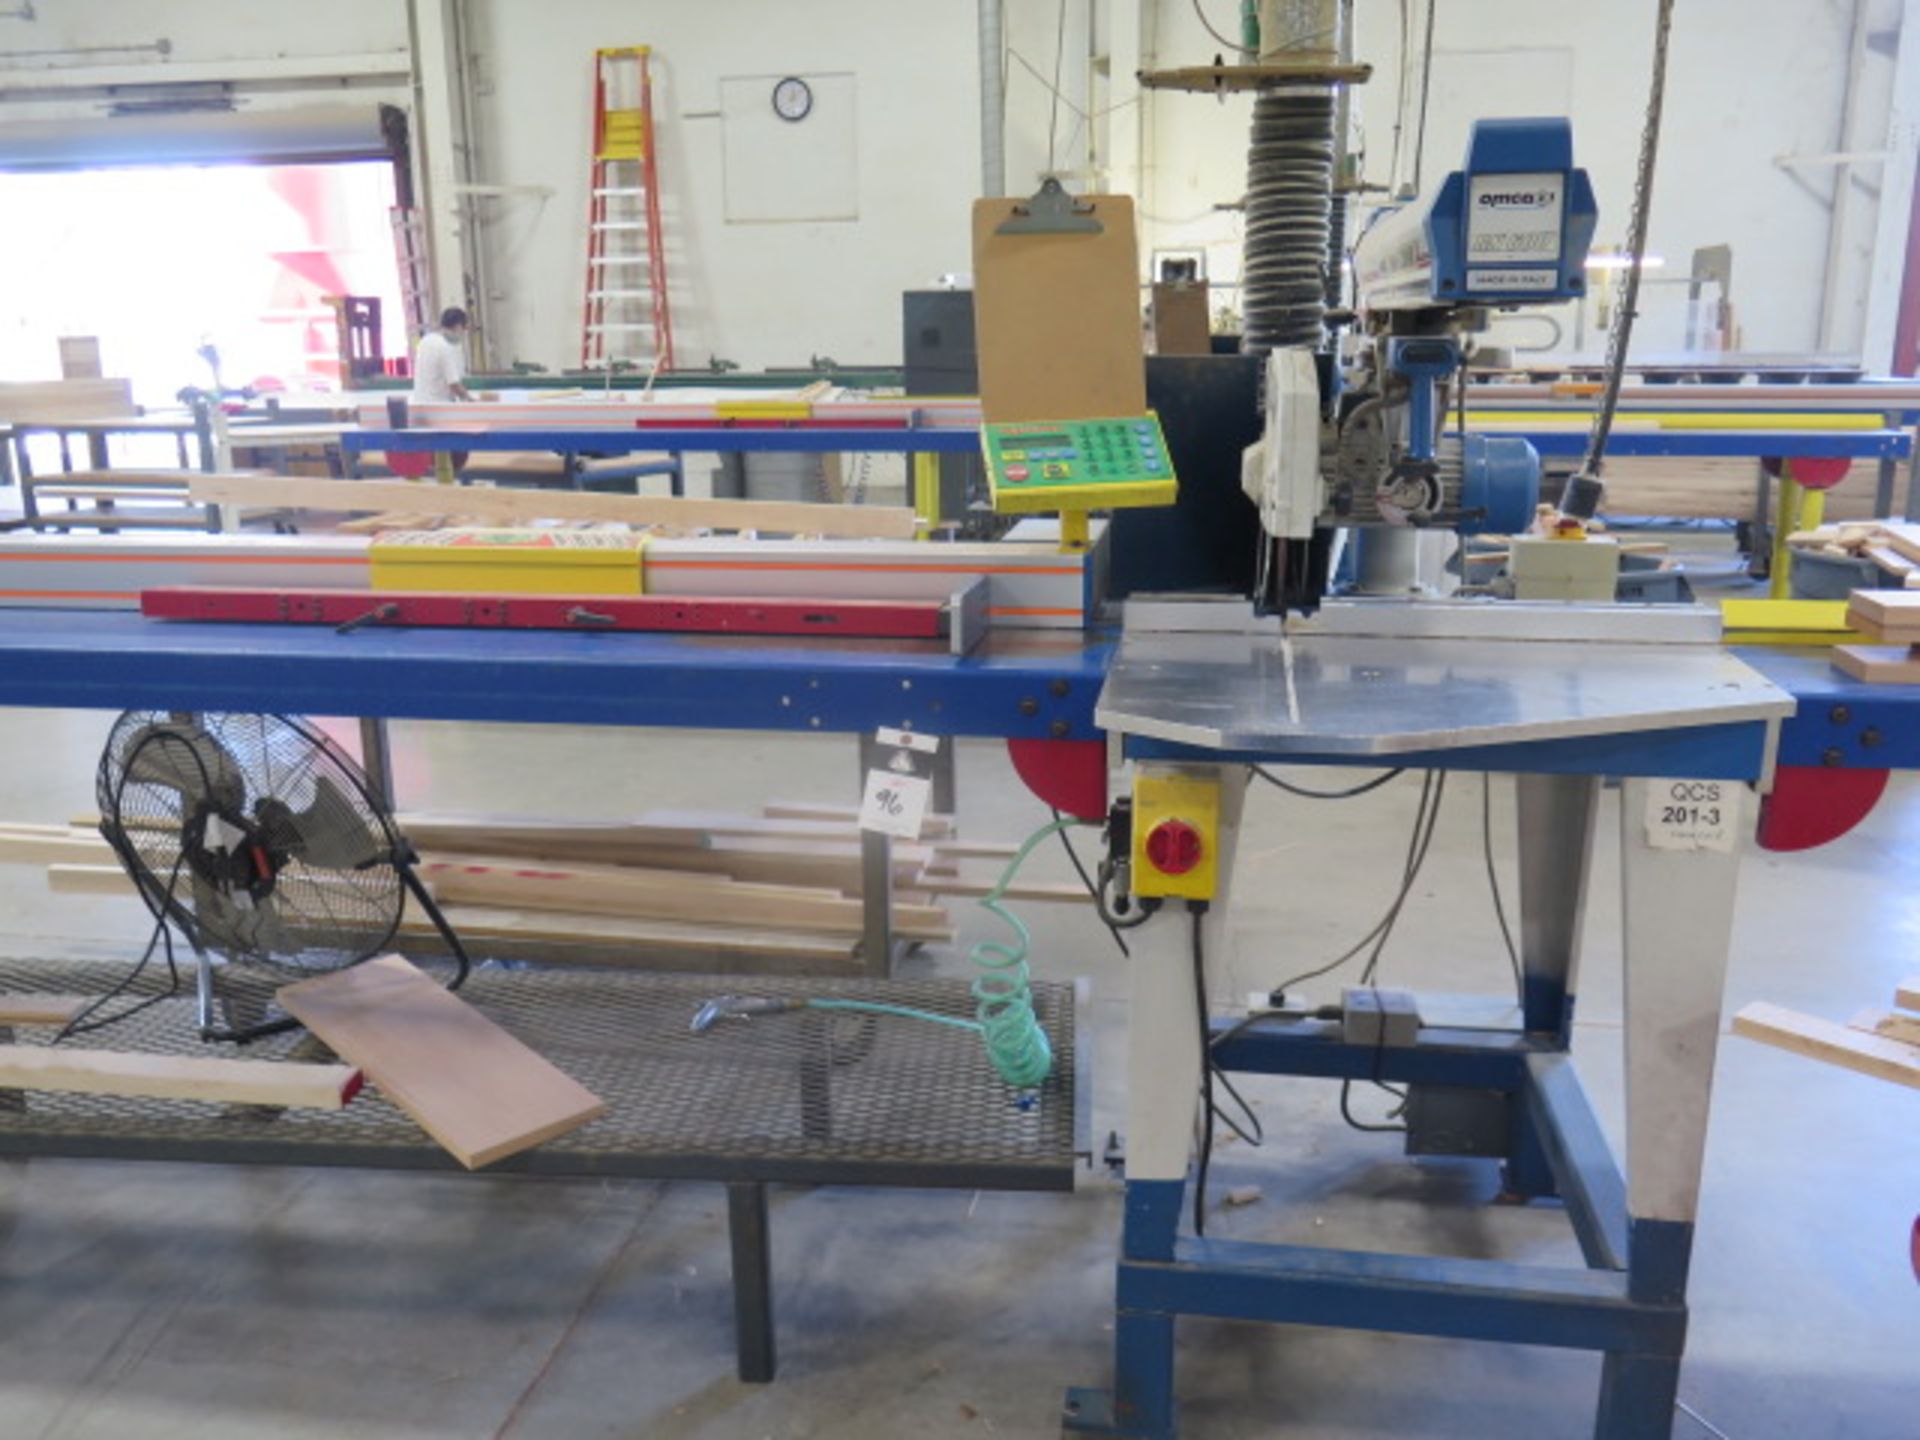 Omga 14” Radial Arm Saw w/ TigerStop 10‘ Programmable Stop System (SOLD AS-IS - NO WARRANTY)